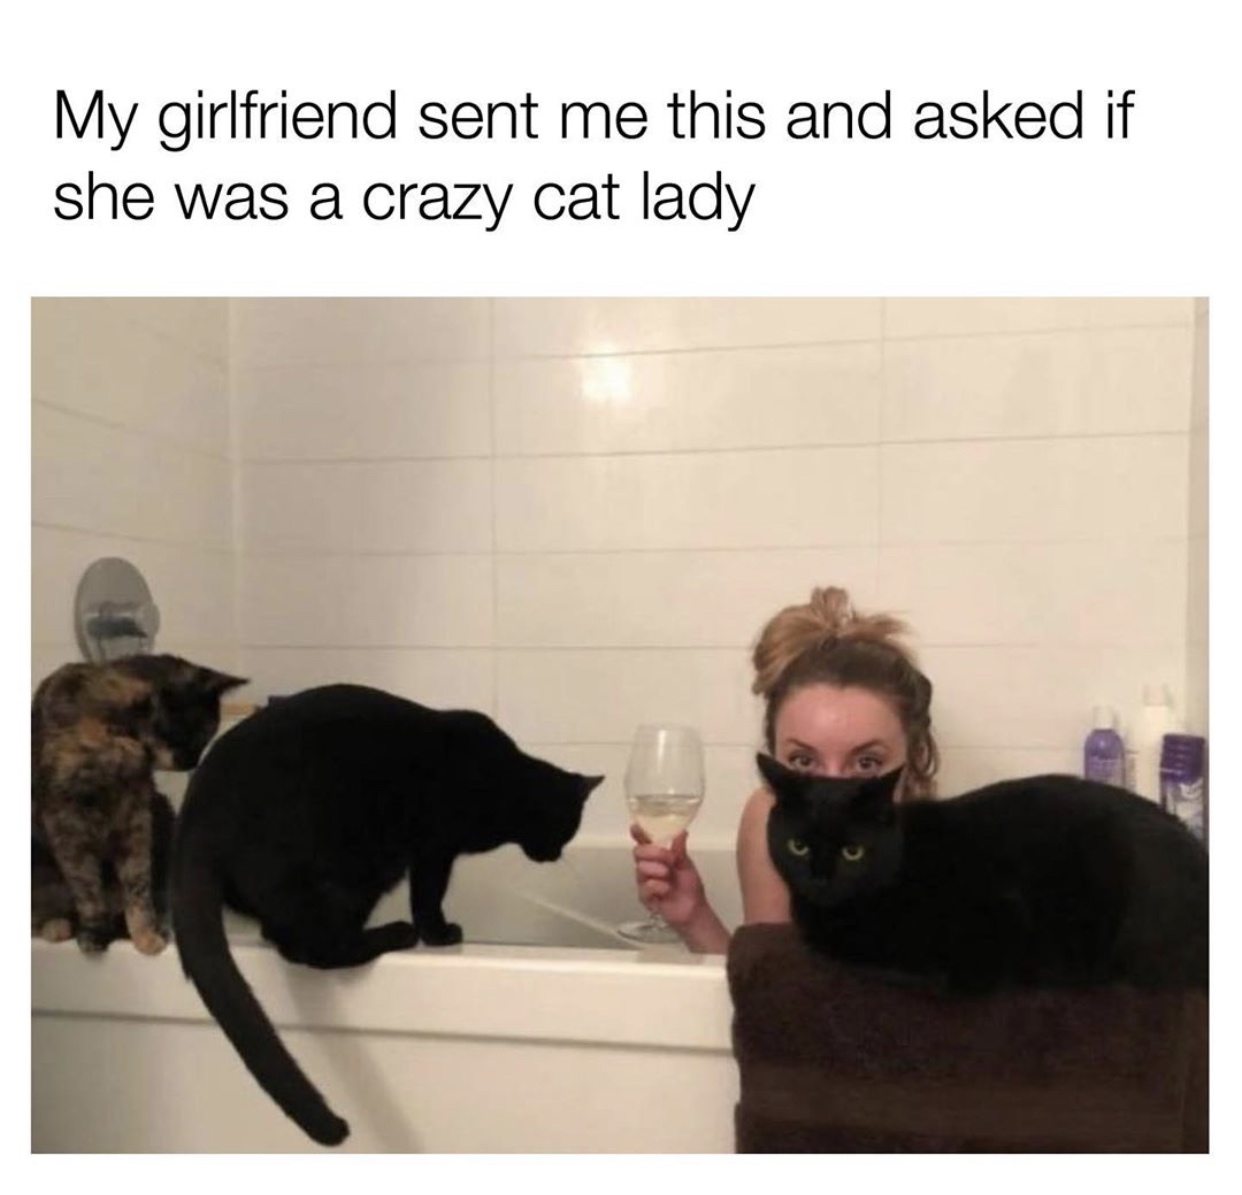 photo caption - My girlfriend sent me this and asked if she was a crazy cat lady